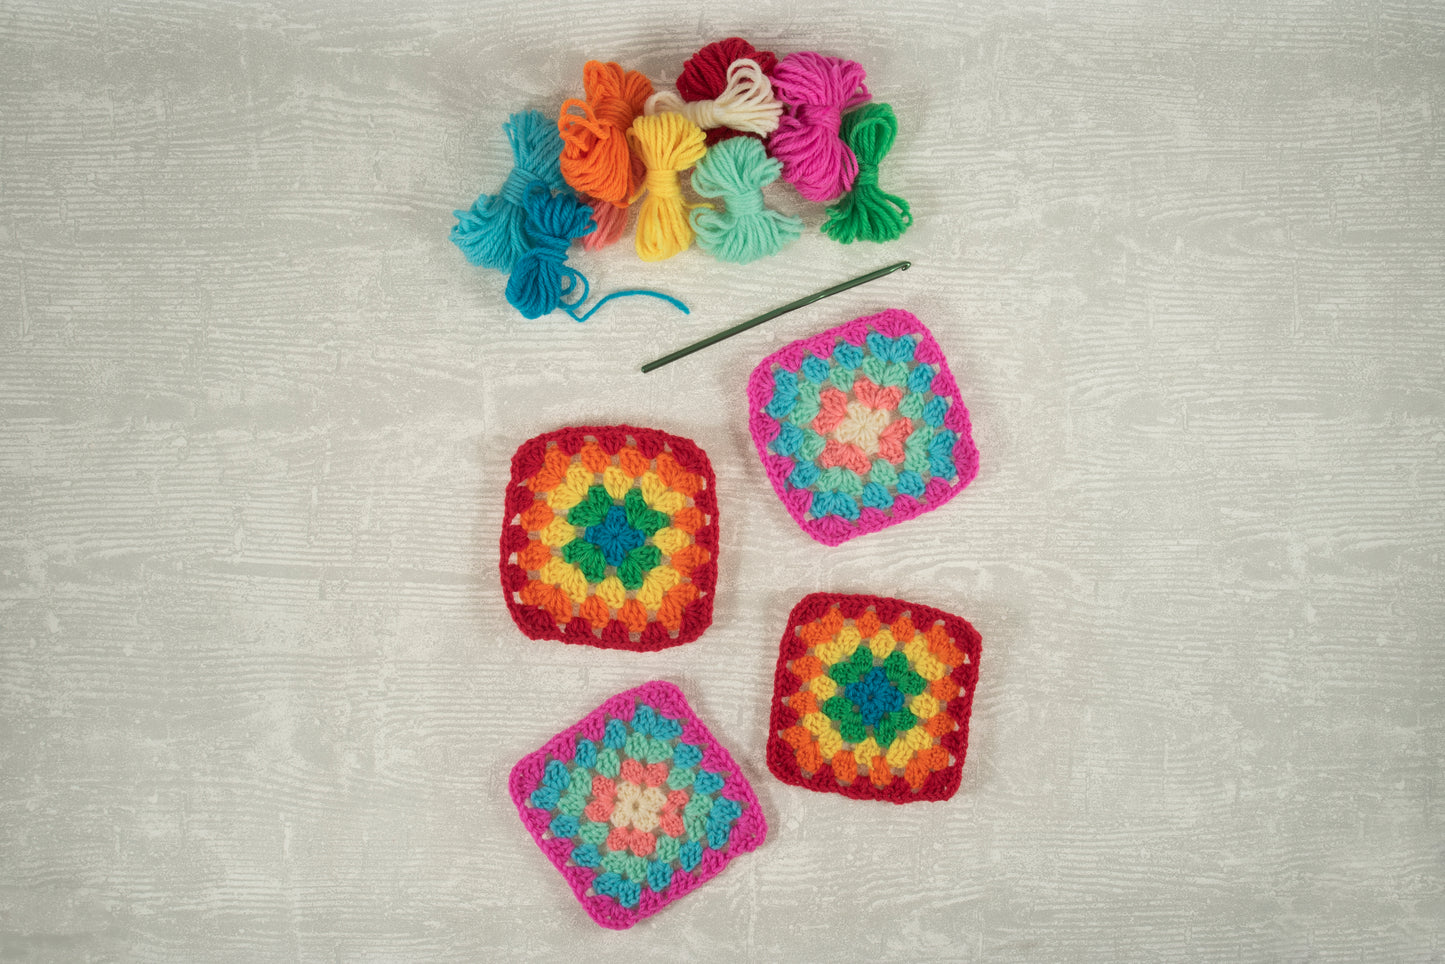 MY FIRST CROCHET KIT - GRANNY SQUARES